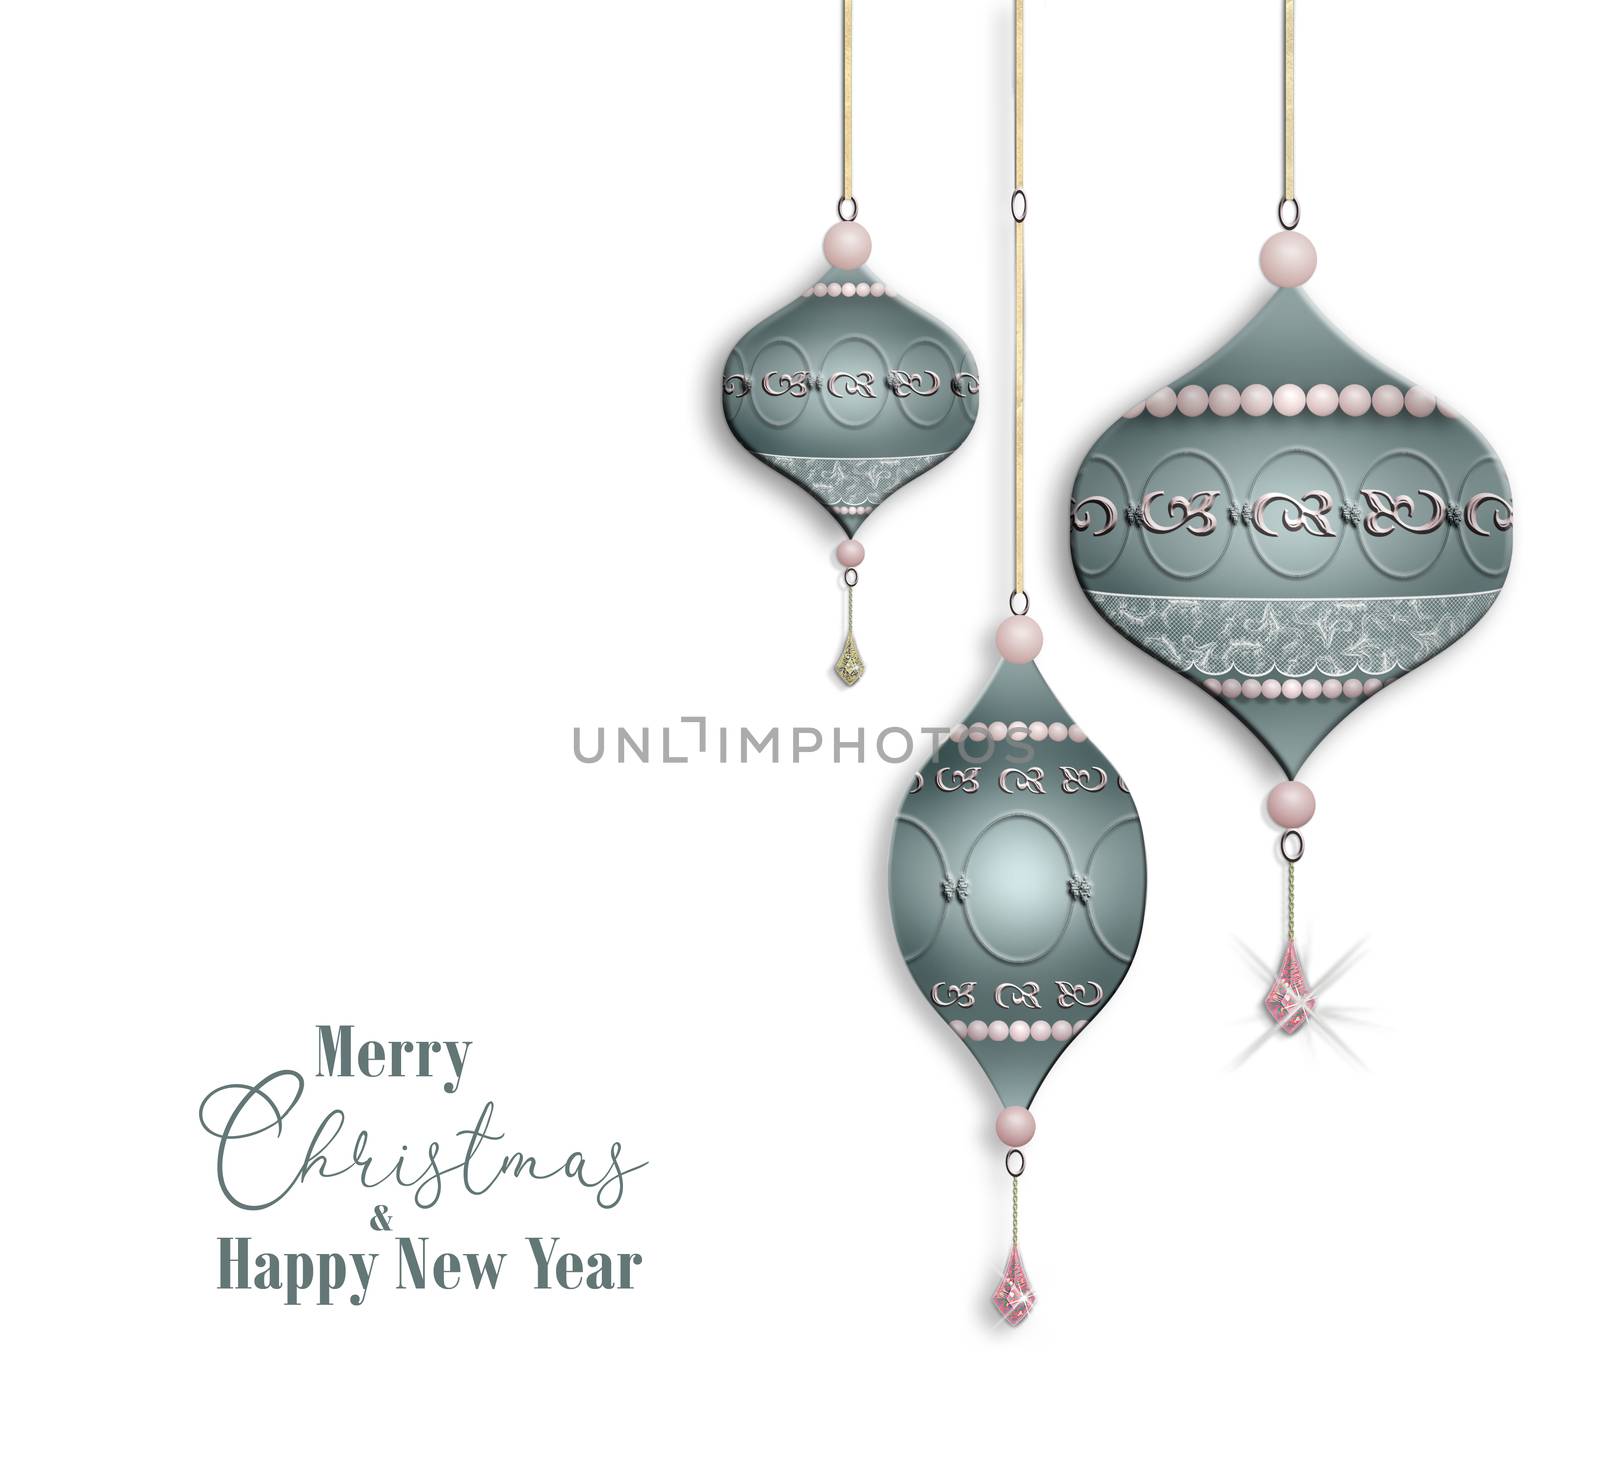 Elegant greetings background for Christmas New Year Events by NelliPolk